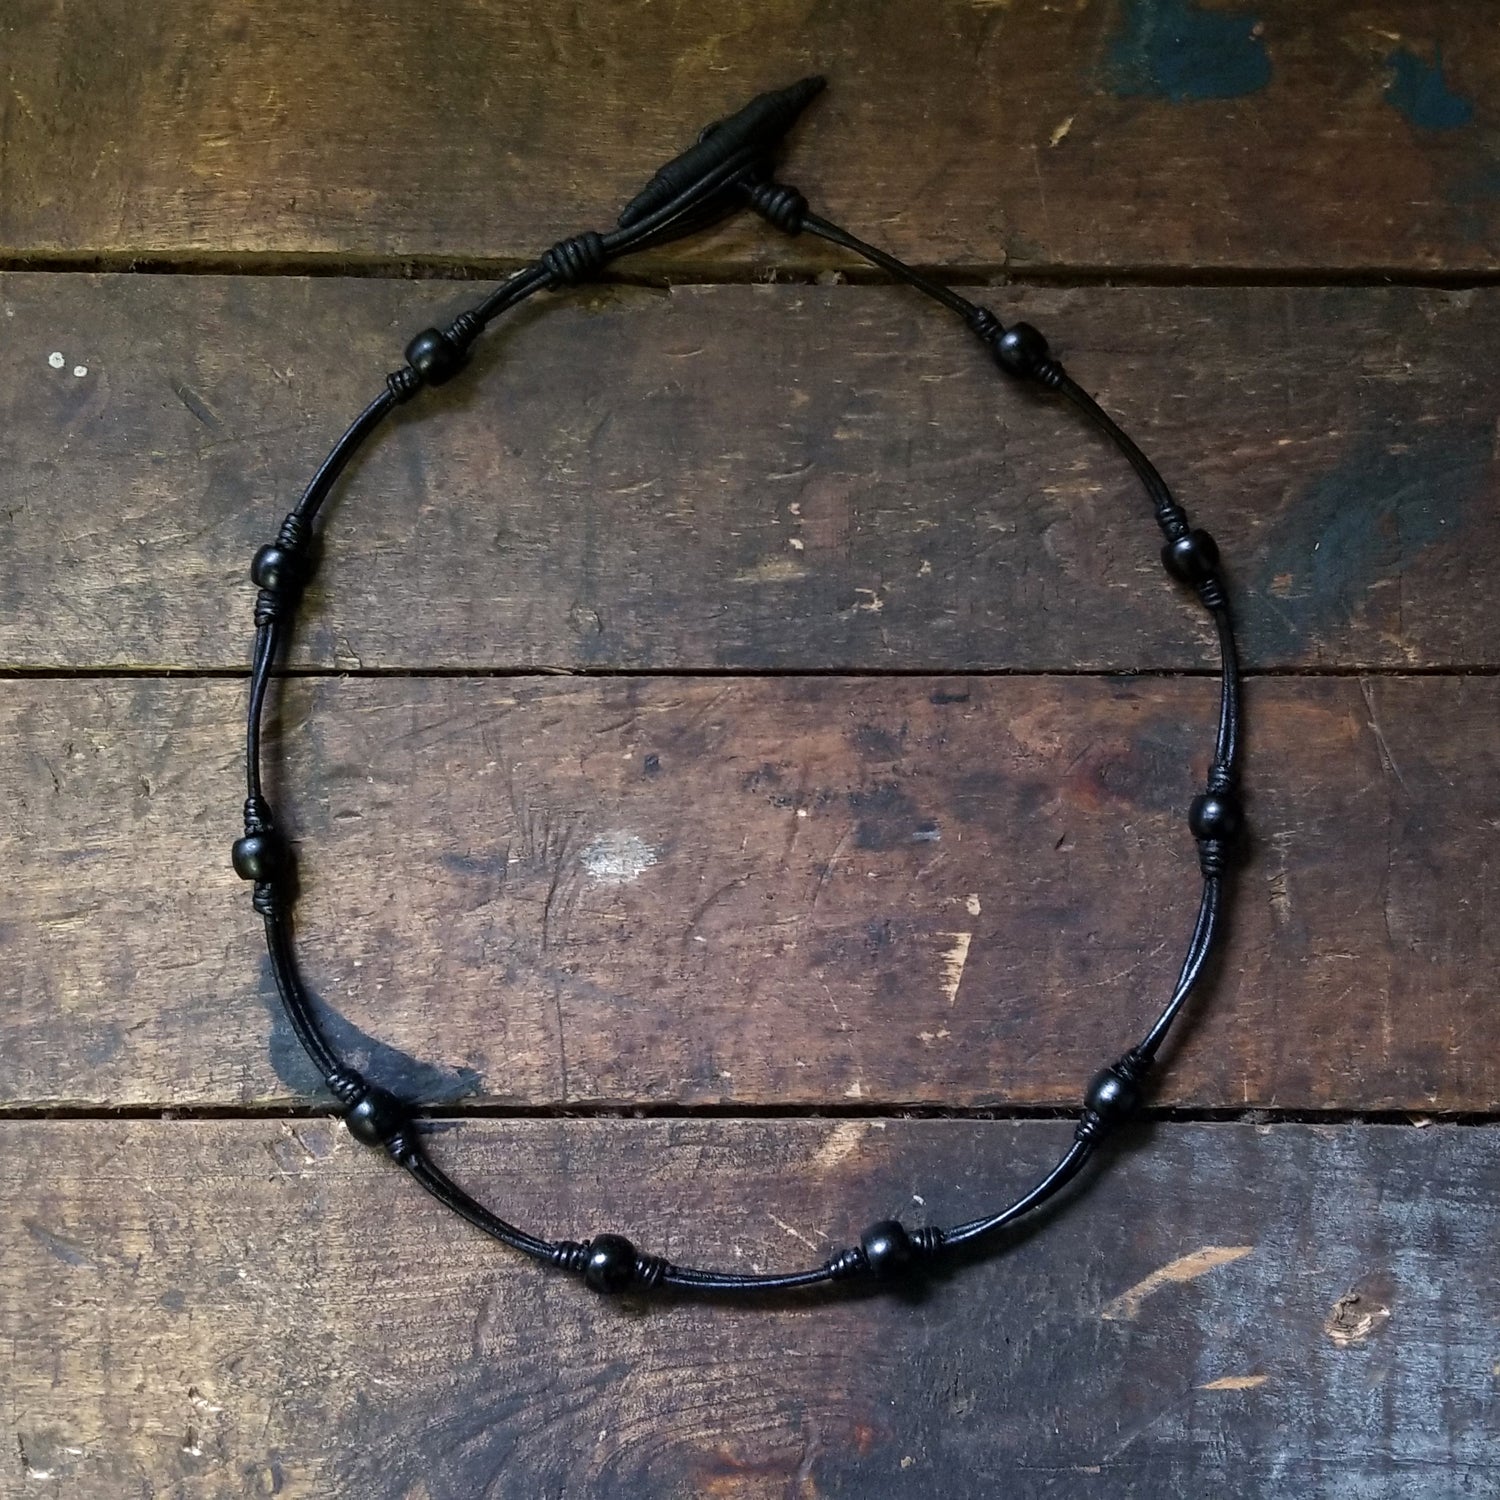 Chuma necklace; black leather cord with black onyx African Trade Beads, Bison Leather Button and Loop Clasp